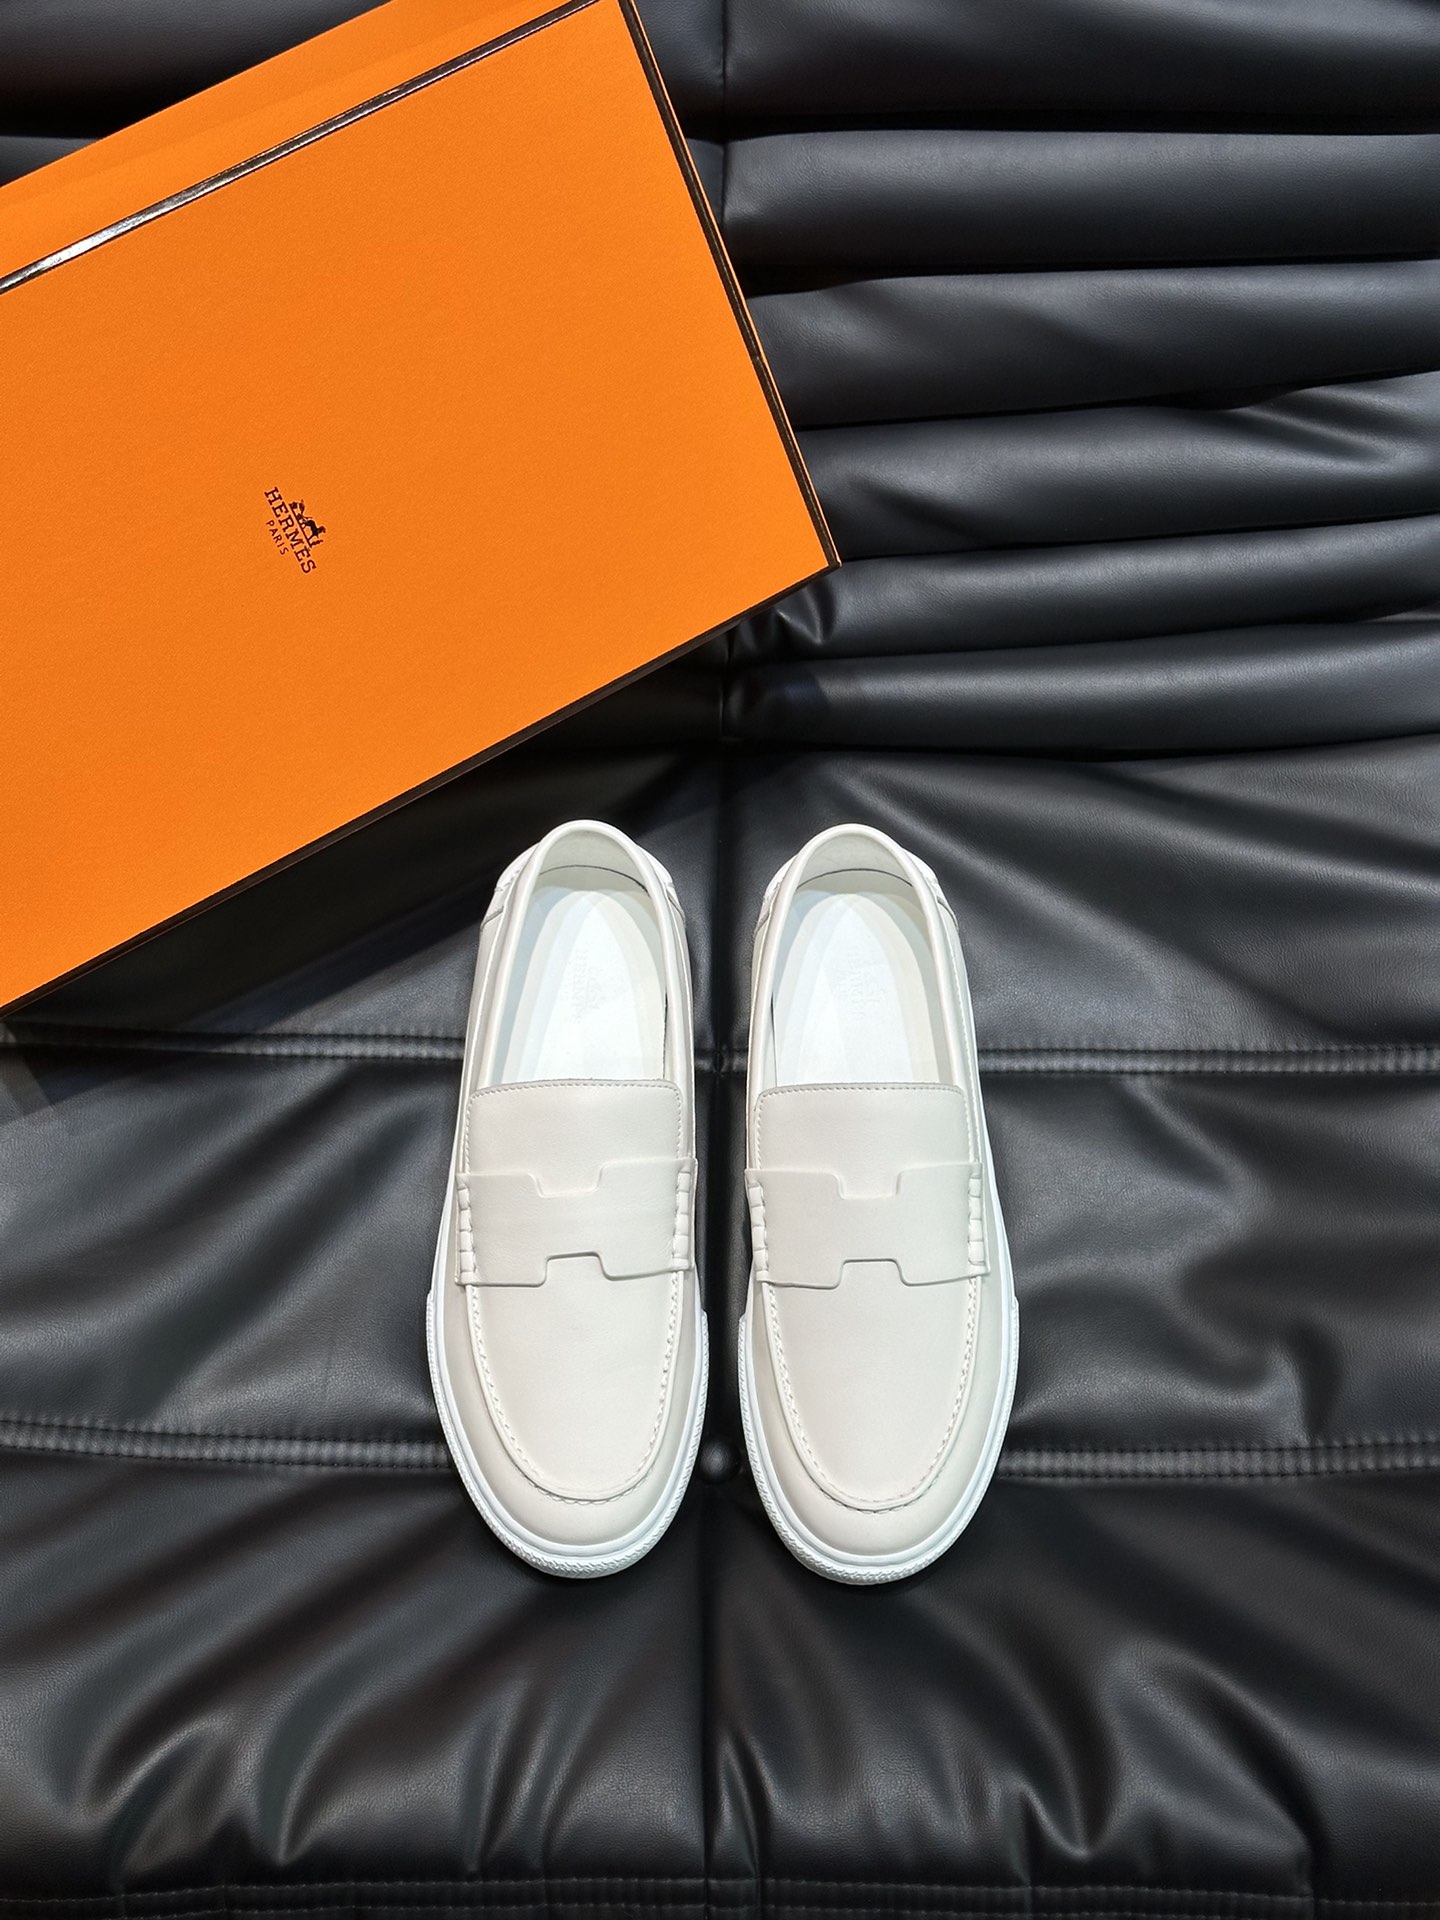 Hermes Shoes Loafers Good Quality Replica
 Men Calfskin Cowhide Genuine Leather Rubber Casual